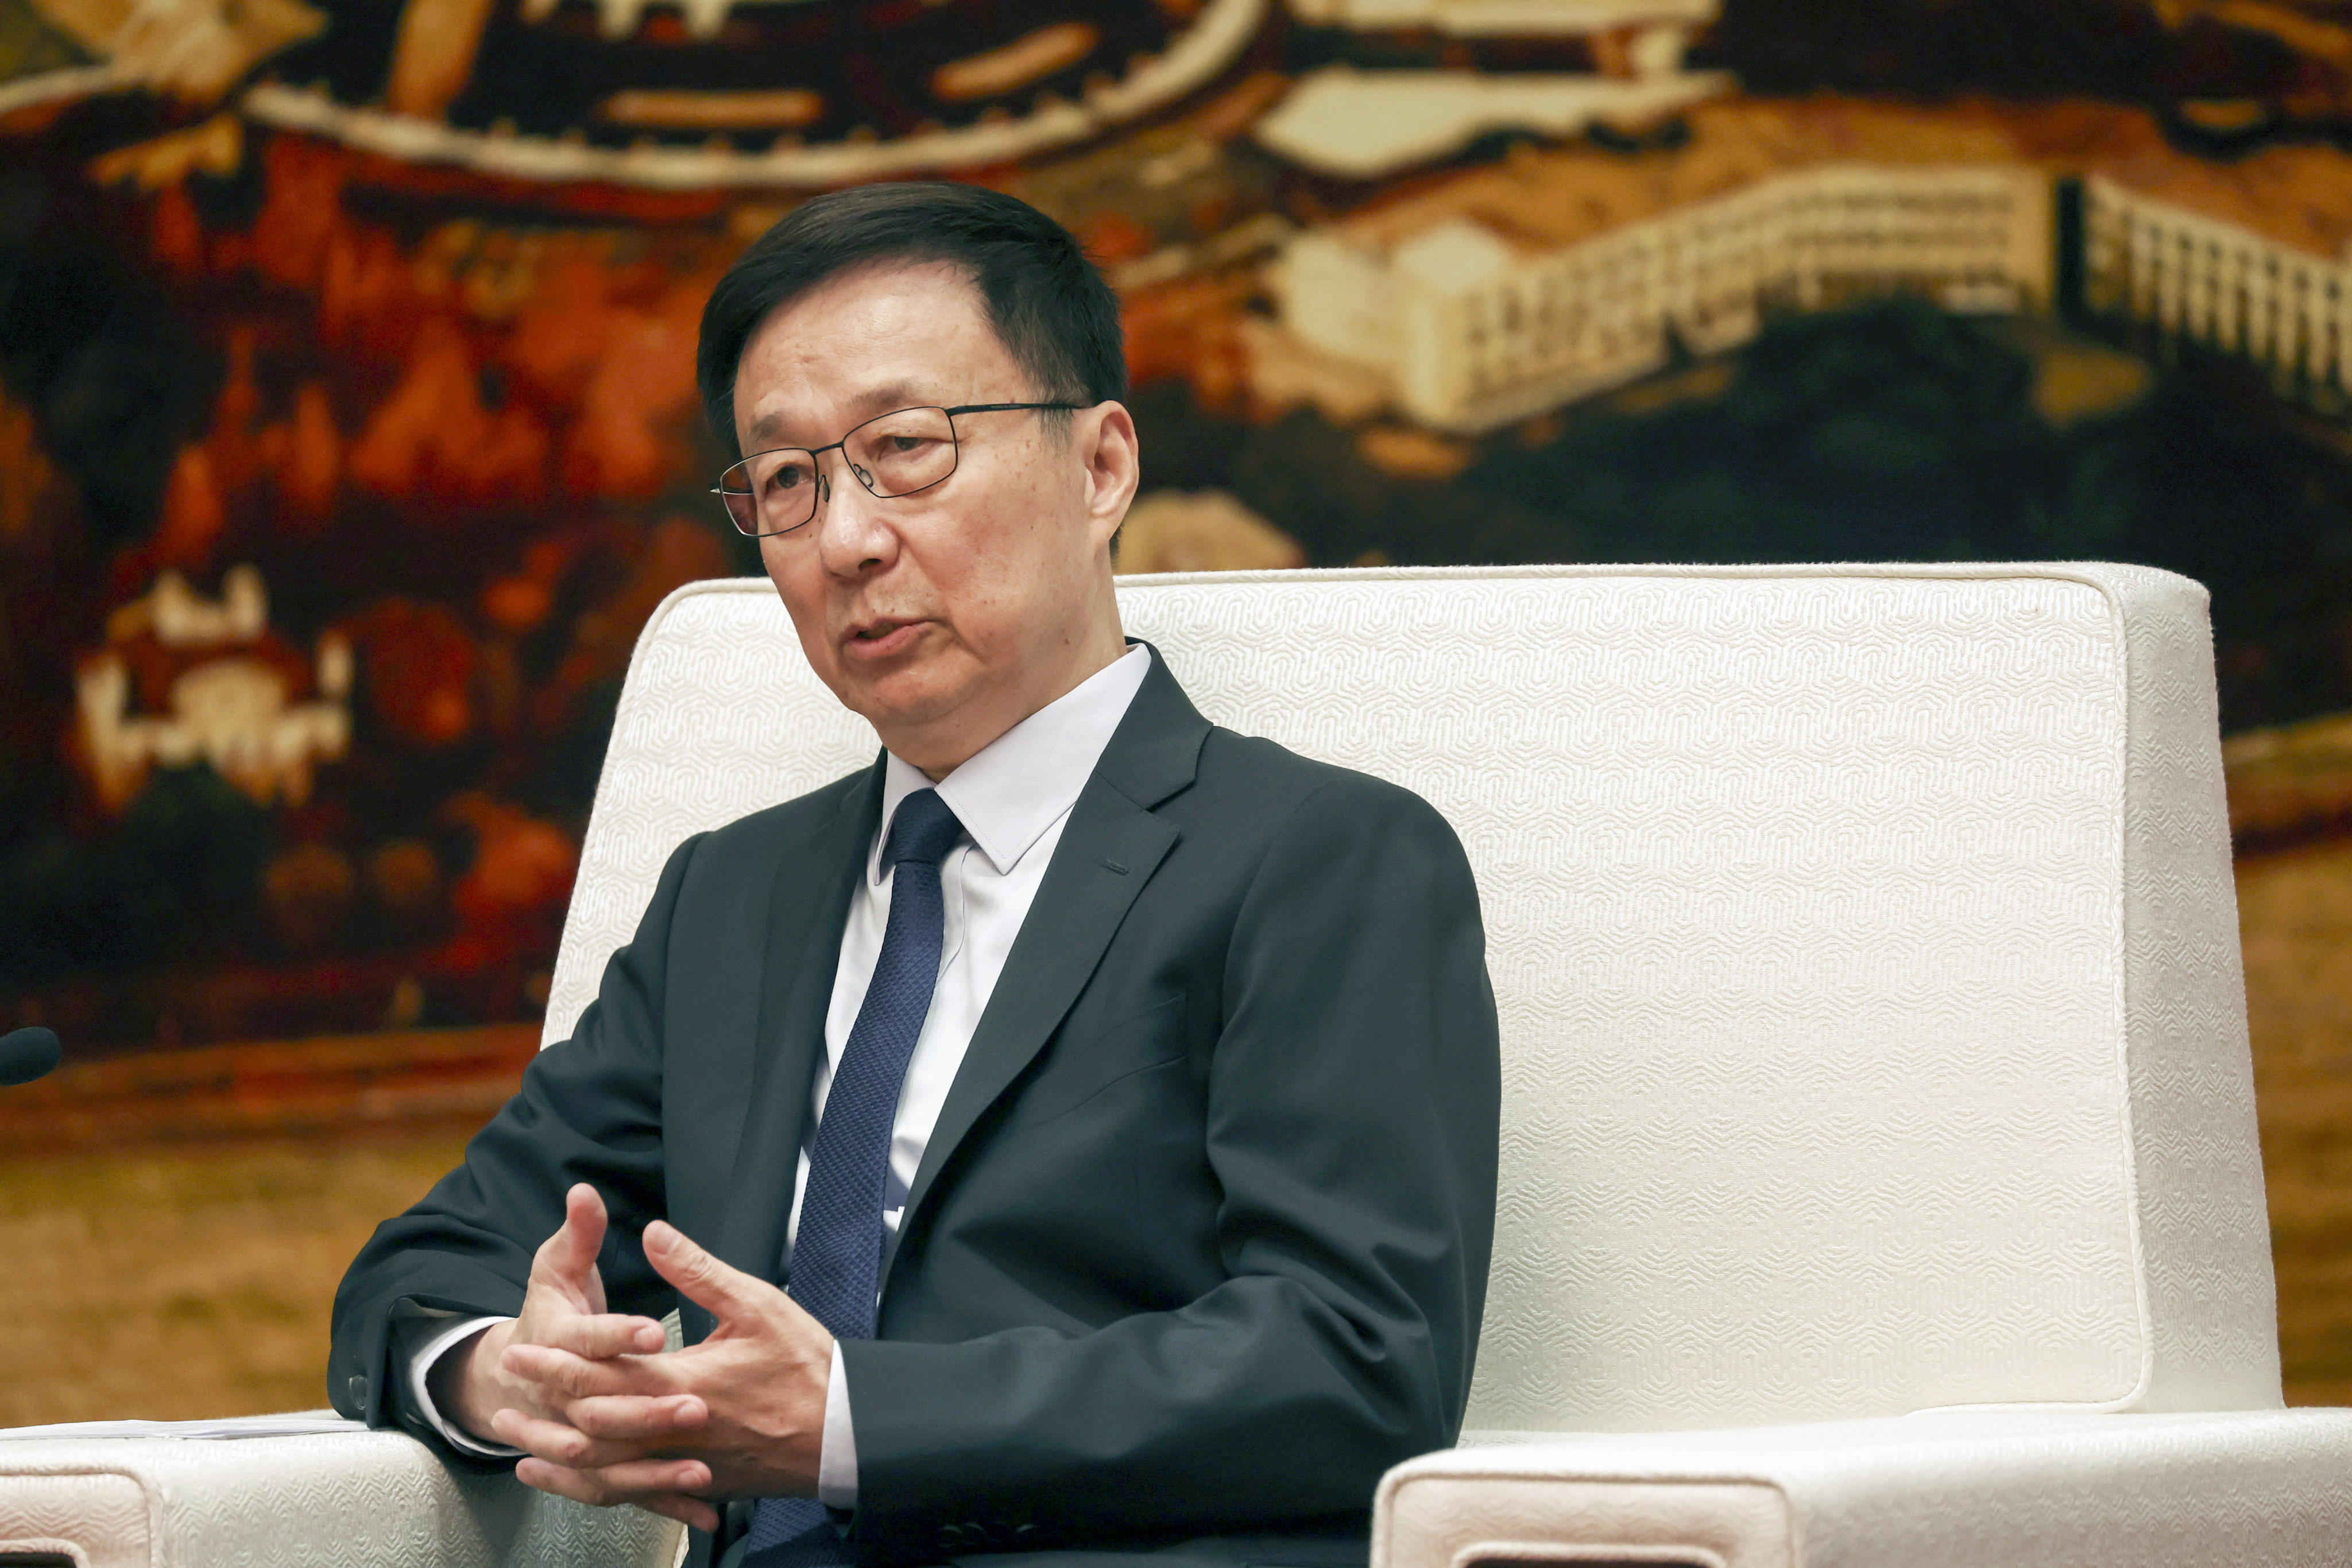 Chinese Vice-President Han Zheng’s duties include representing the country at ceremonies and events overseas and receiving foreign guests in China. Photo: EPA-EFE